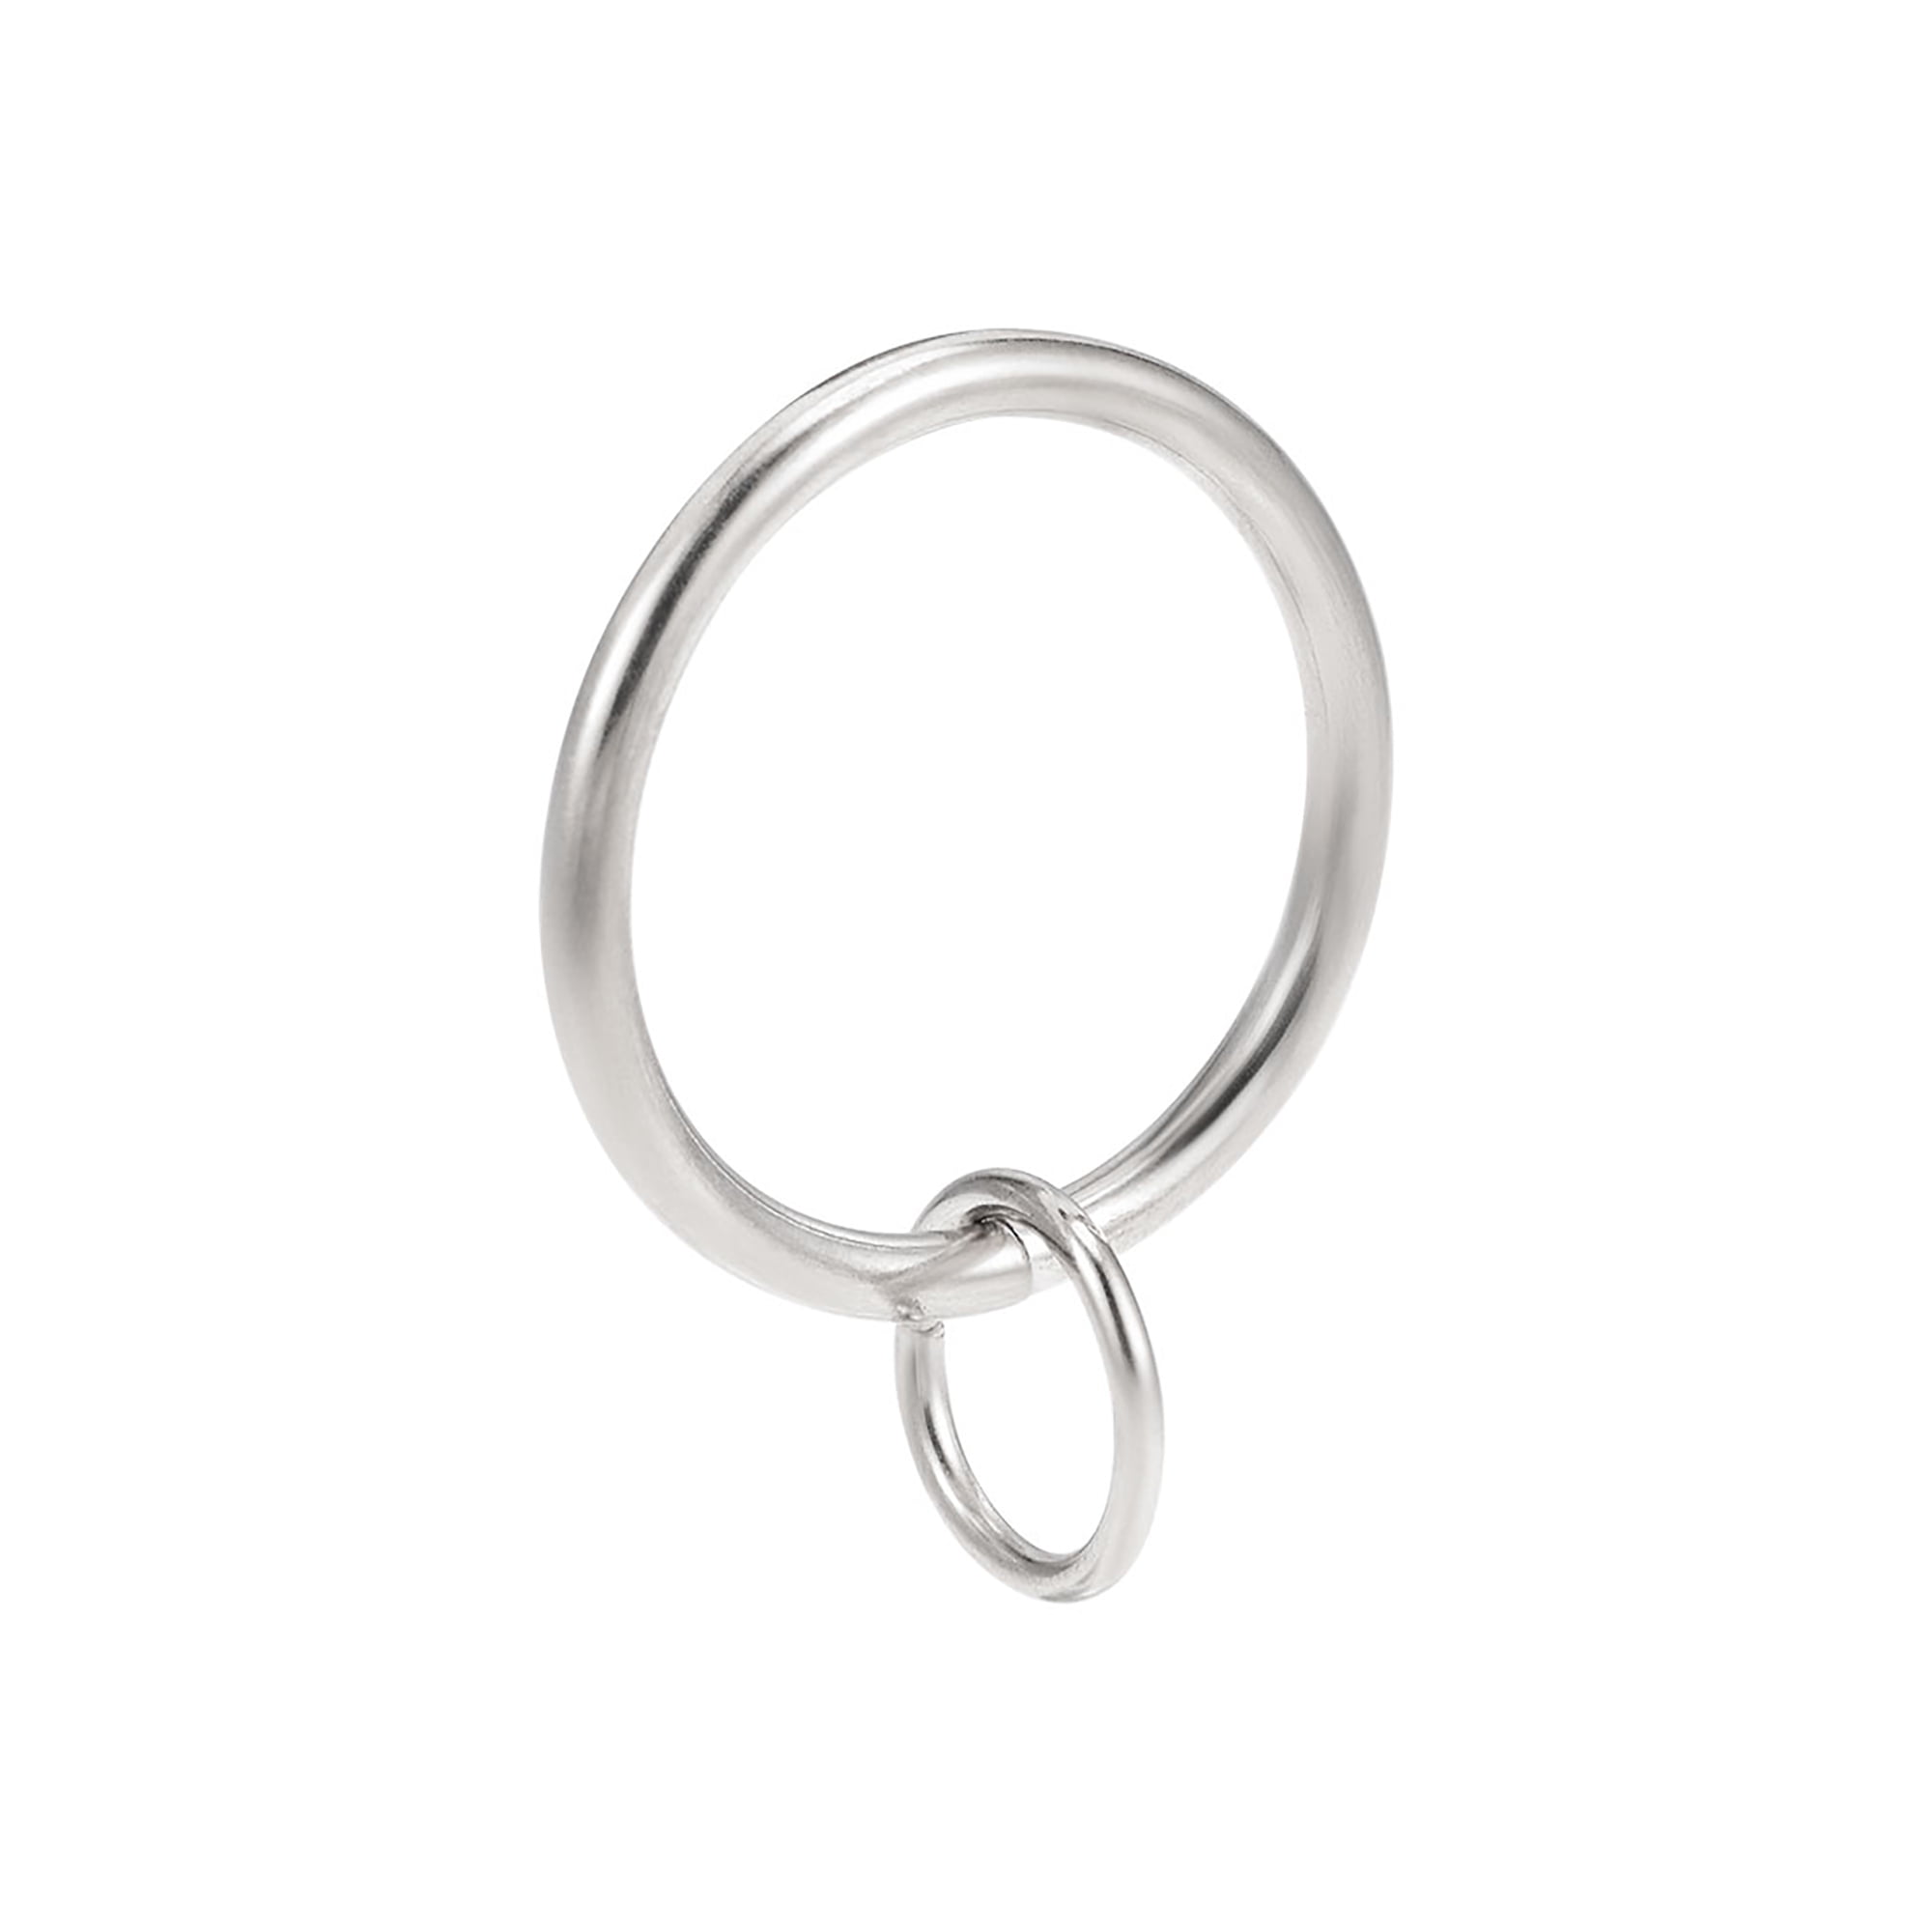 for sizes 16-19mm Rods Use Metal Curtain Rings 20 Pack sizes 28mm rings 